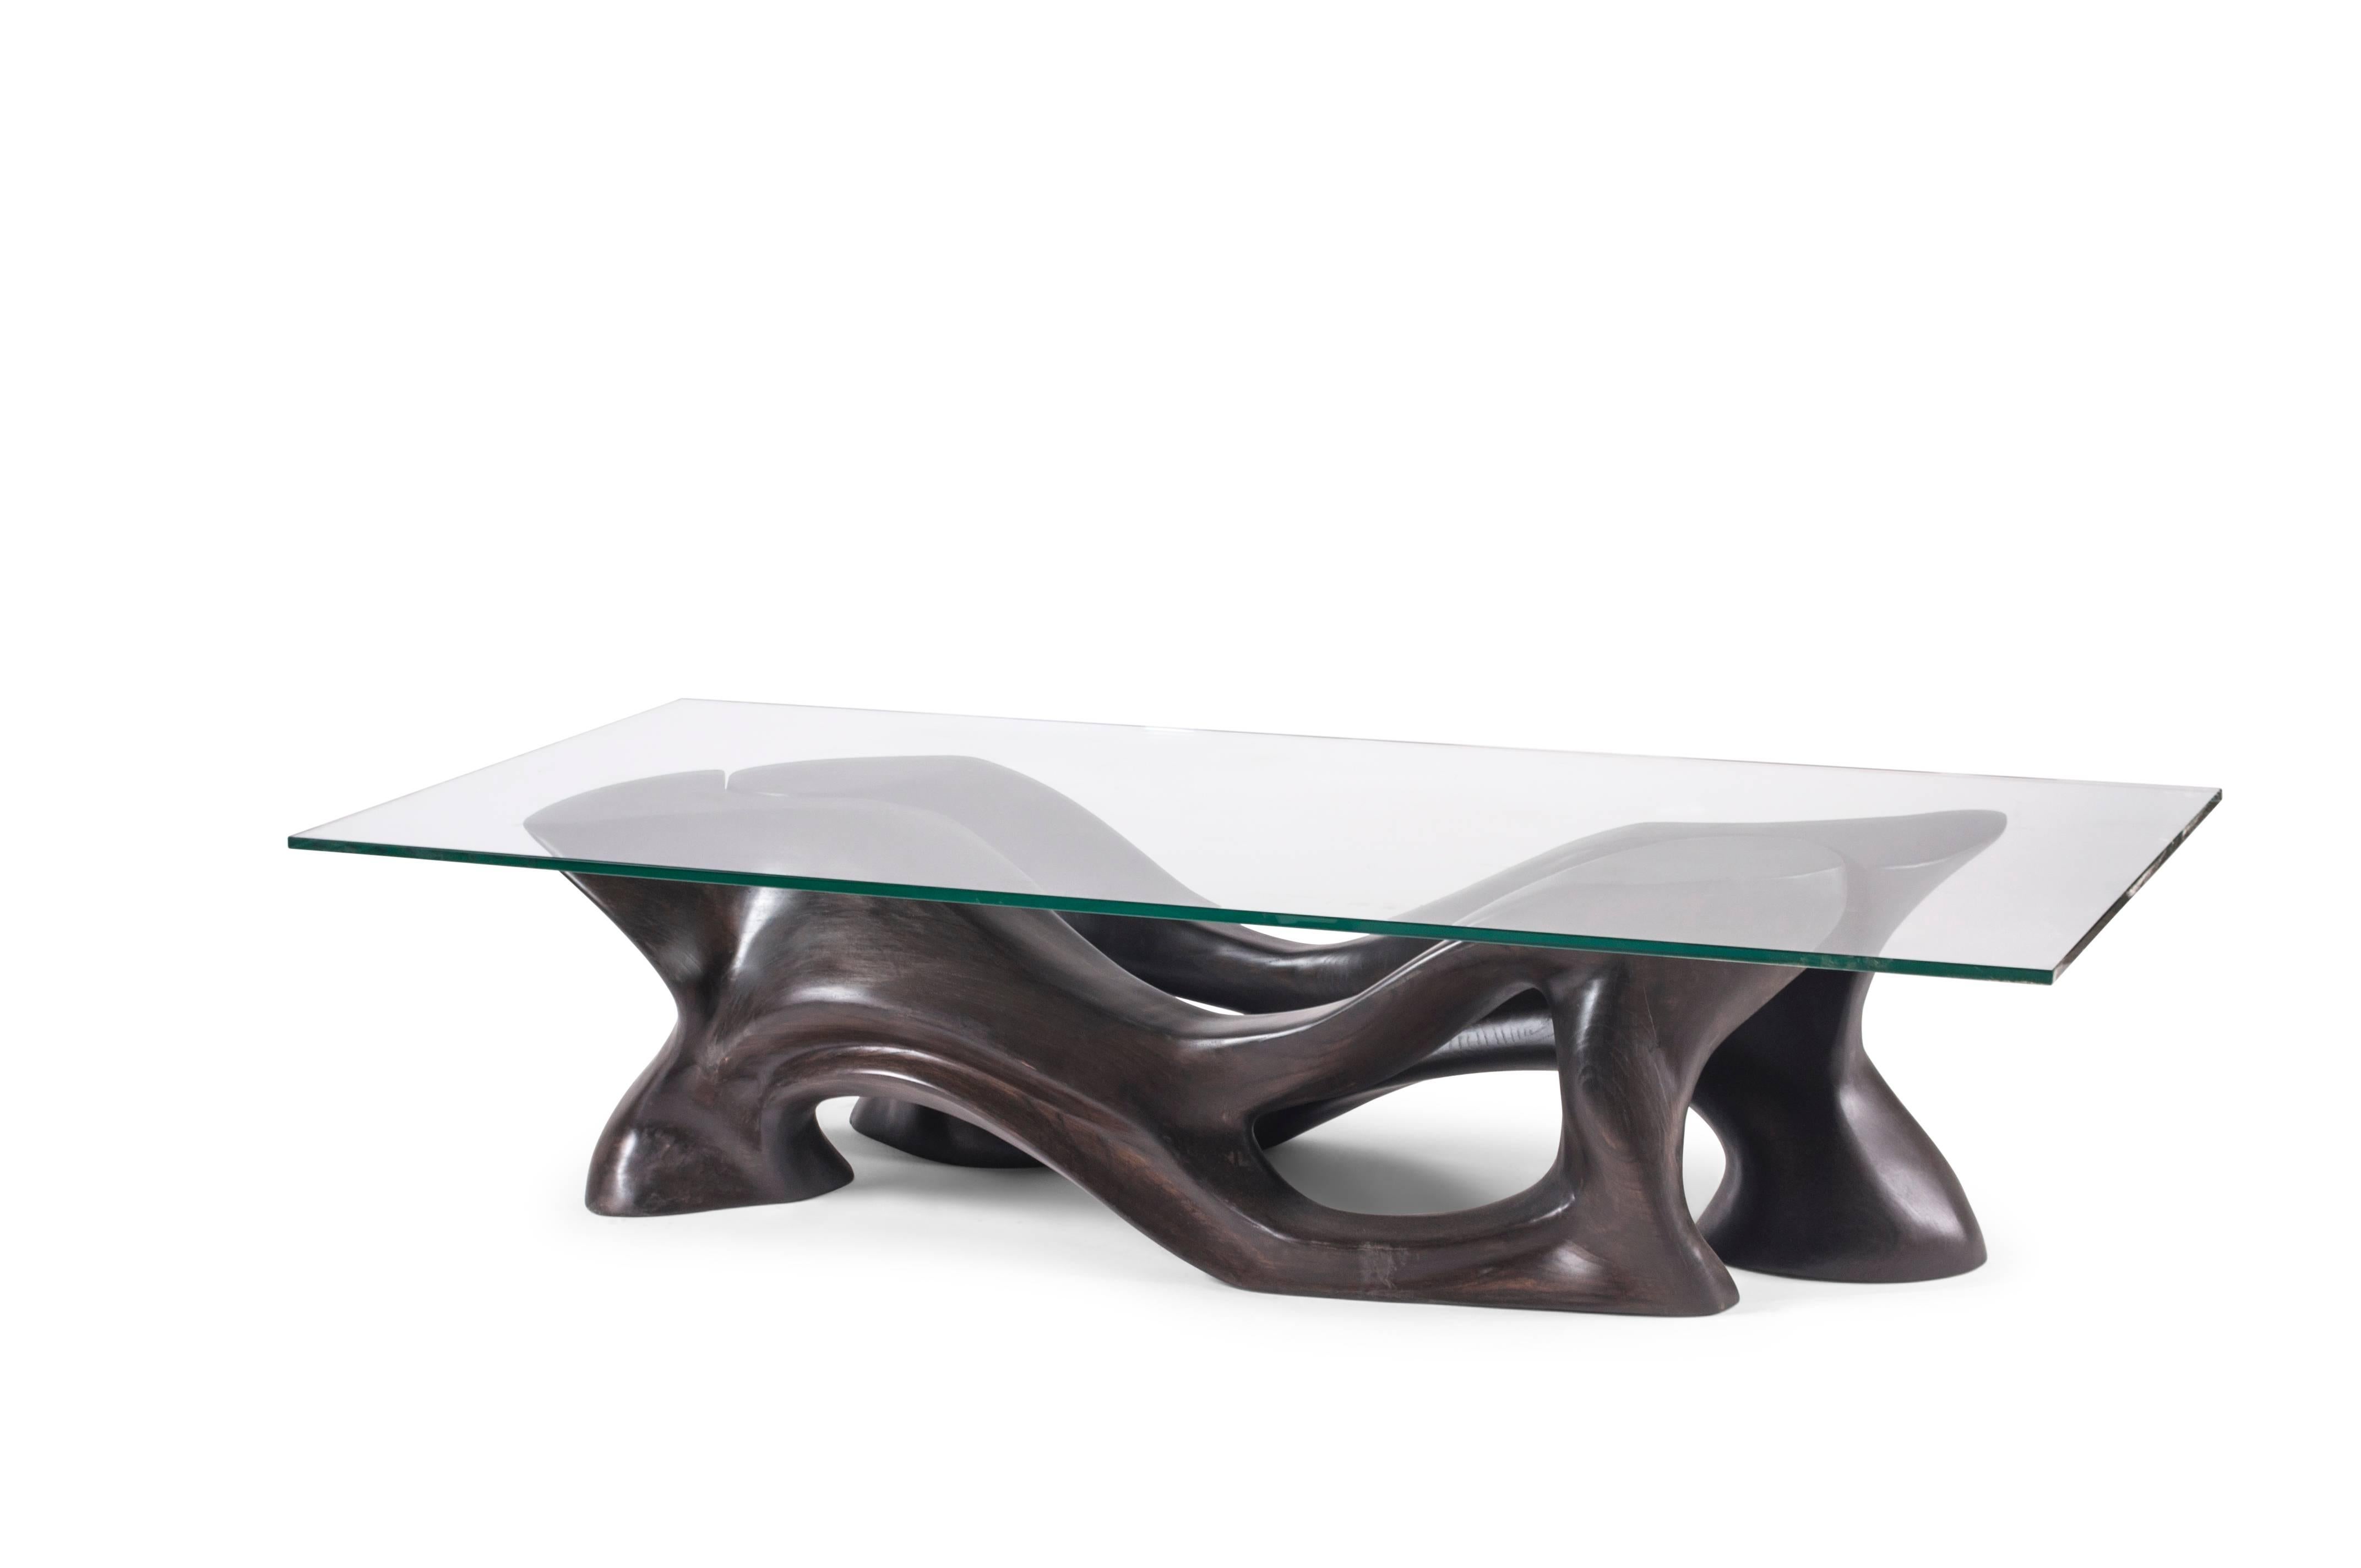 Hand-Carved Amorph Crux Modern Coffee Table, Ebony stain in Ash wood with rectangular glass  For Sale